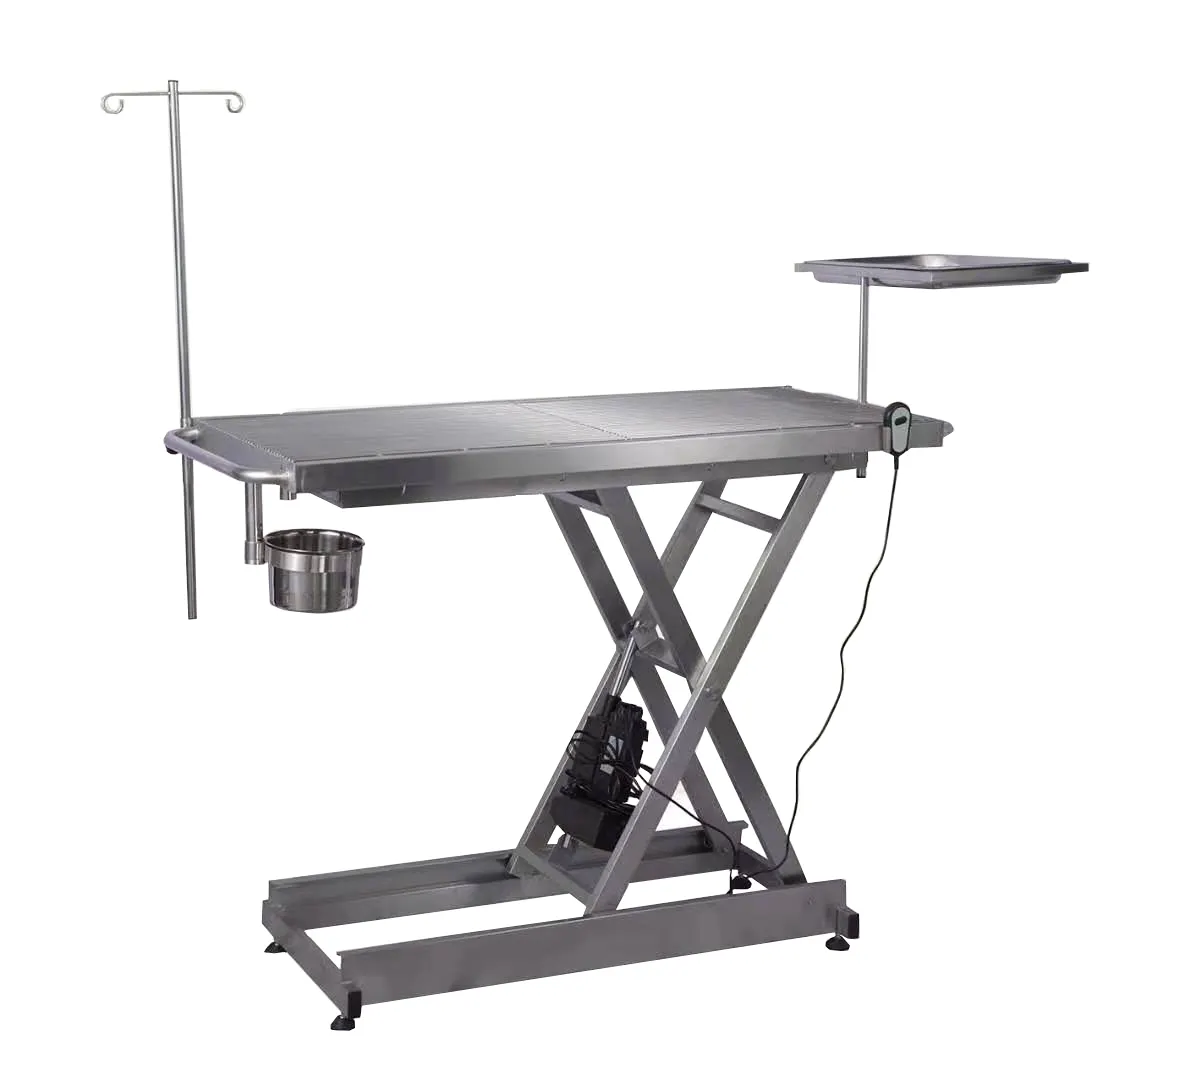 Vet surgery equipment veterinary surgical table electric lifting dog cat operating table for pet hospital clinic